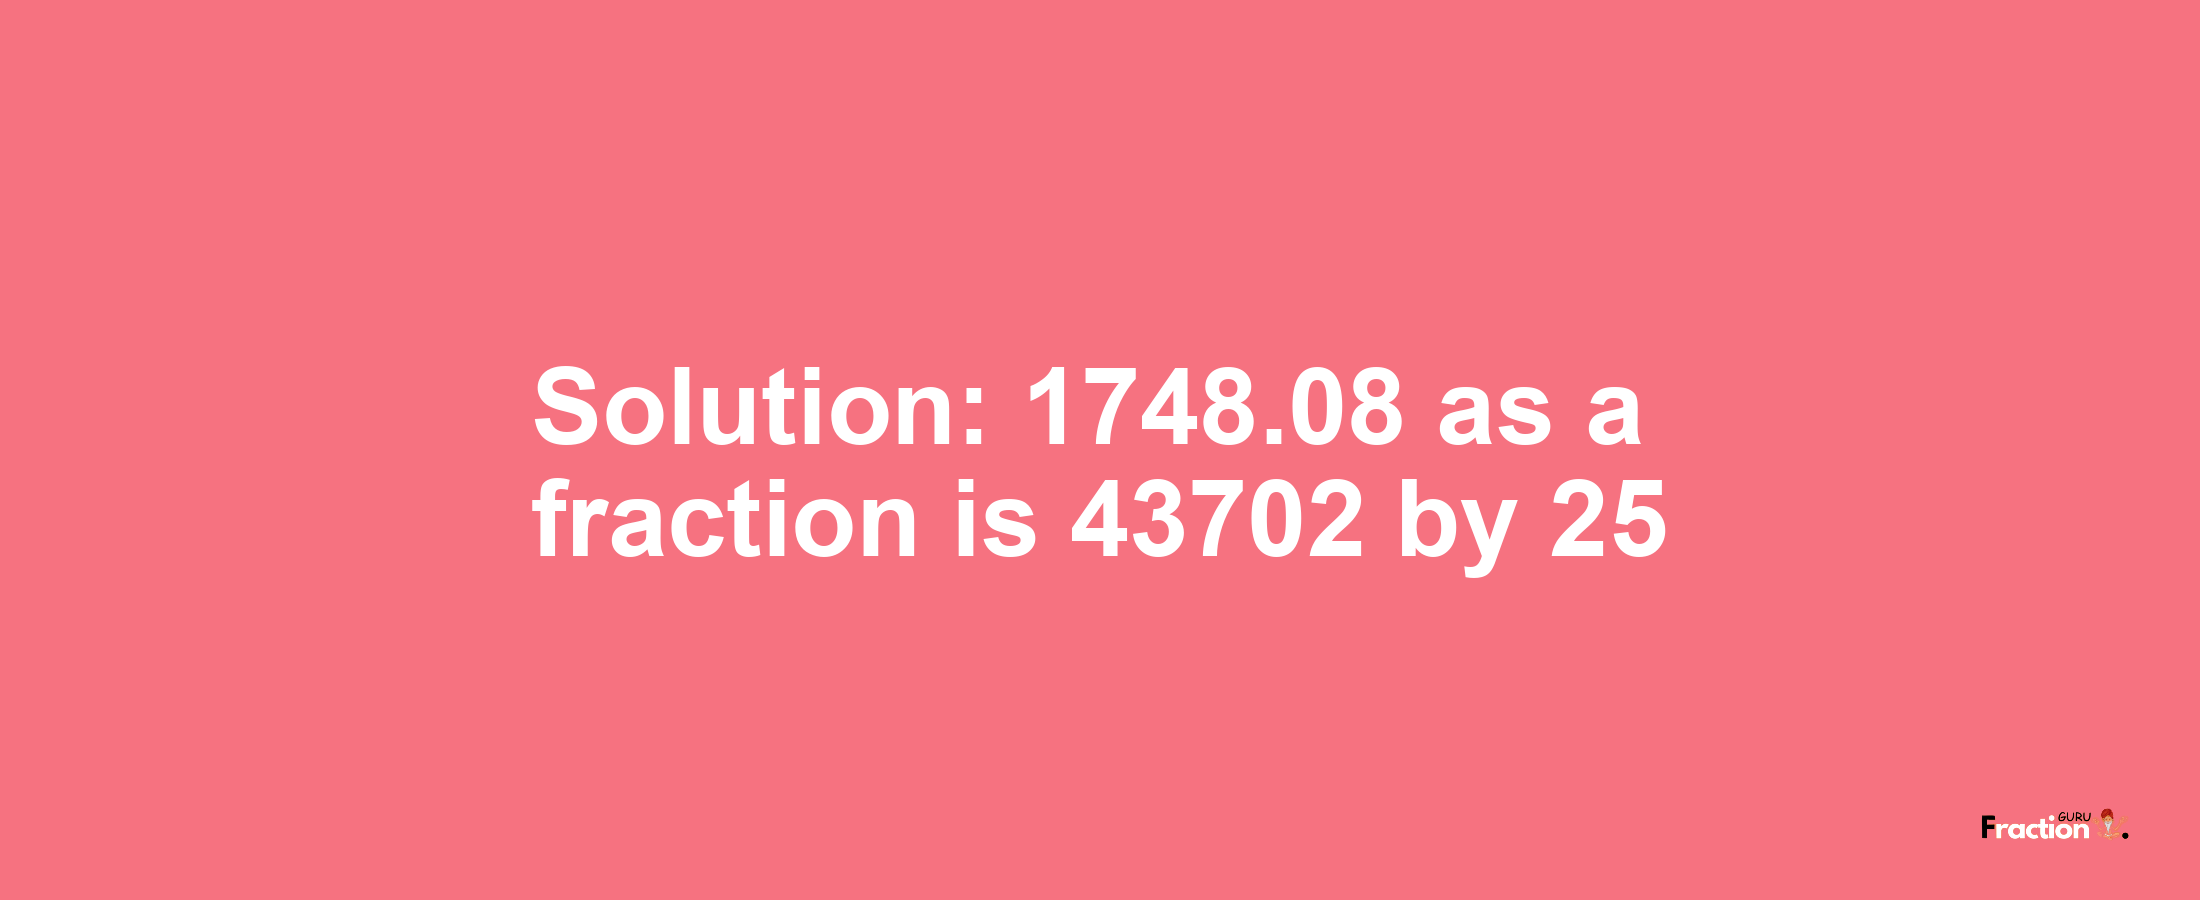 Solution:1748.08 as a fraction is 43702/25